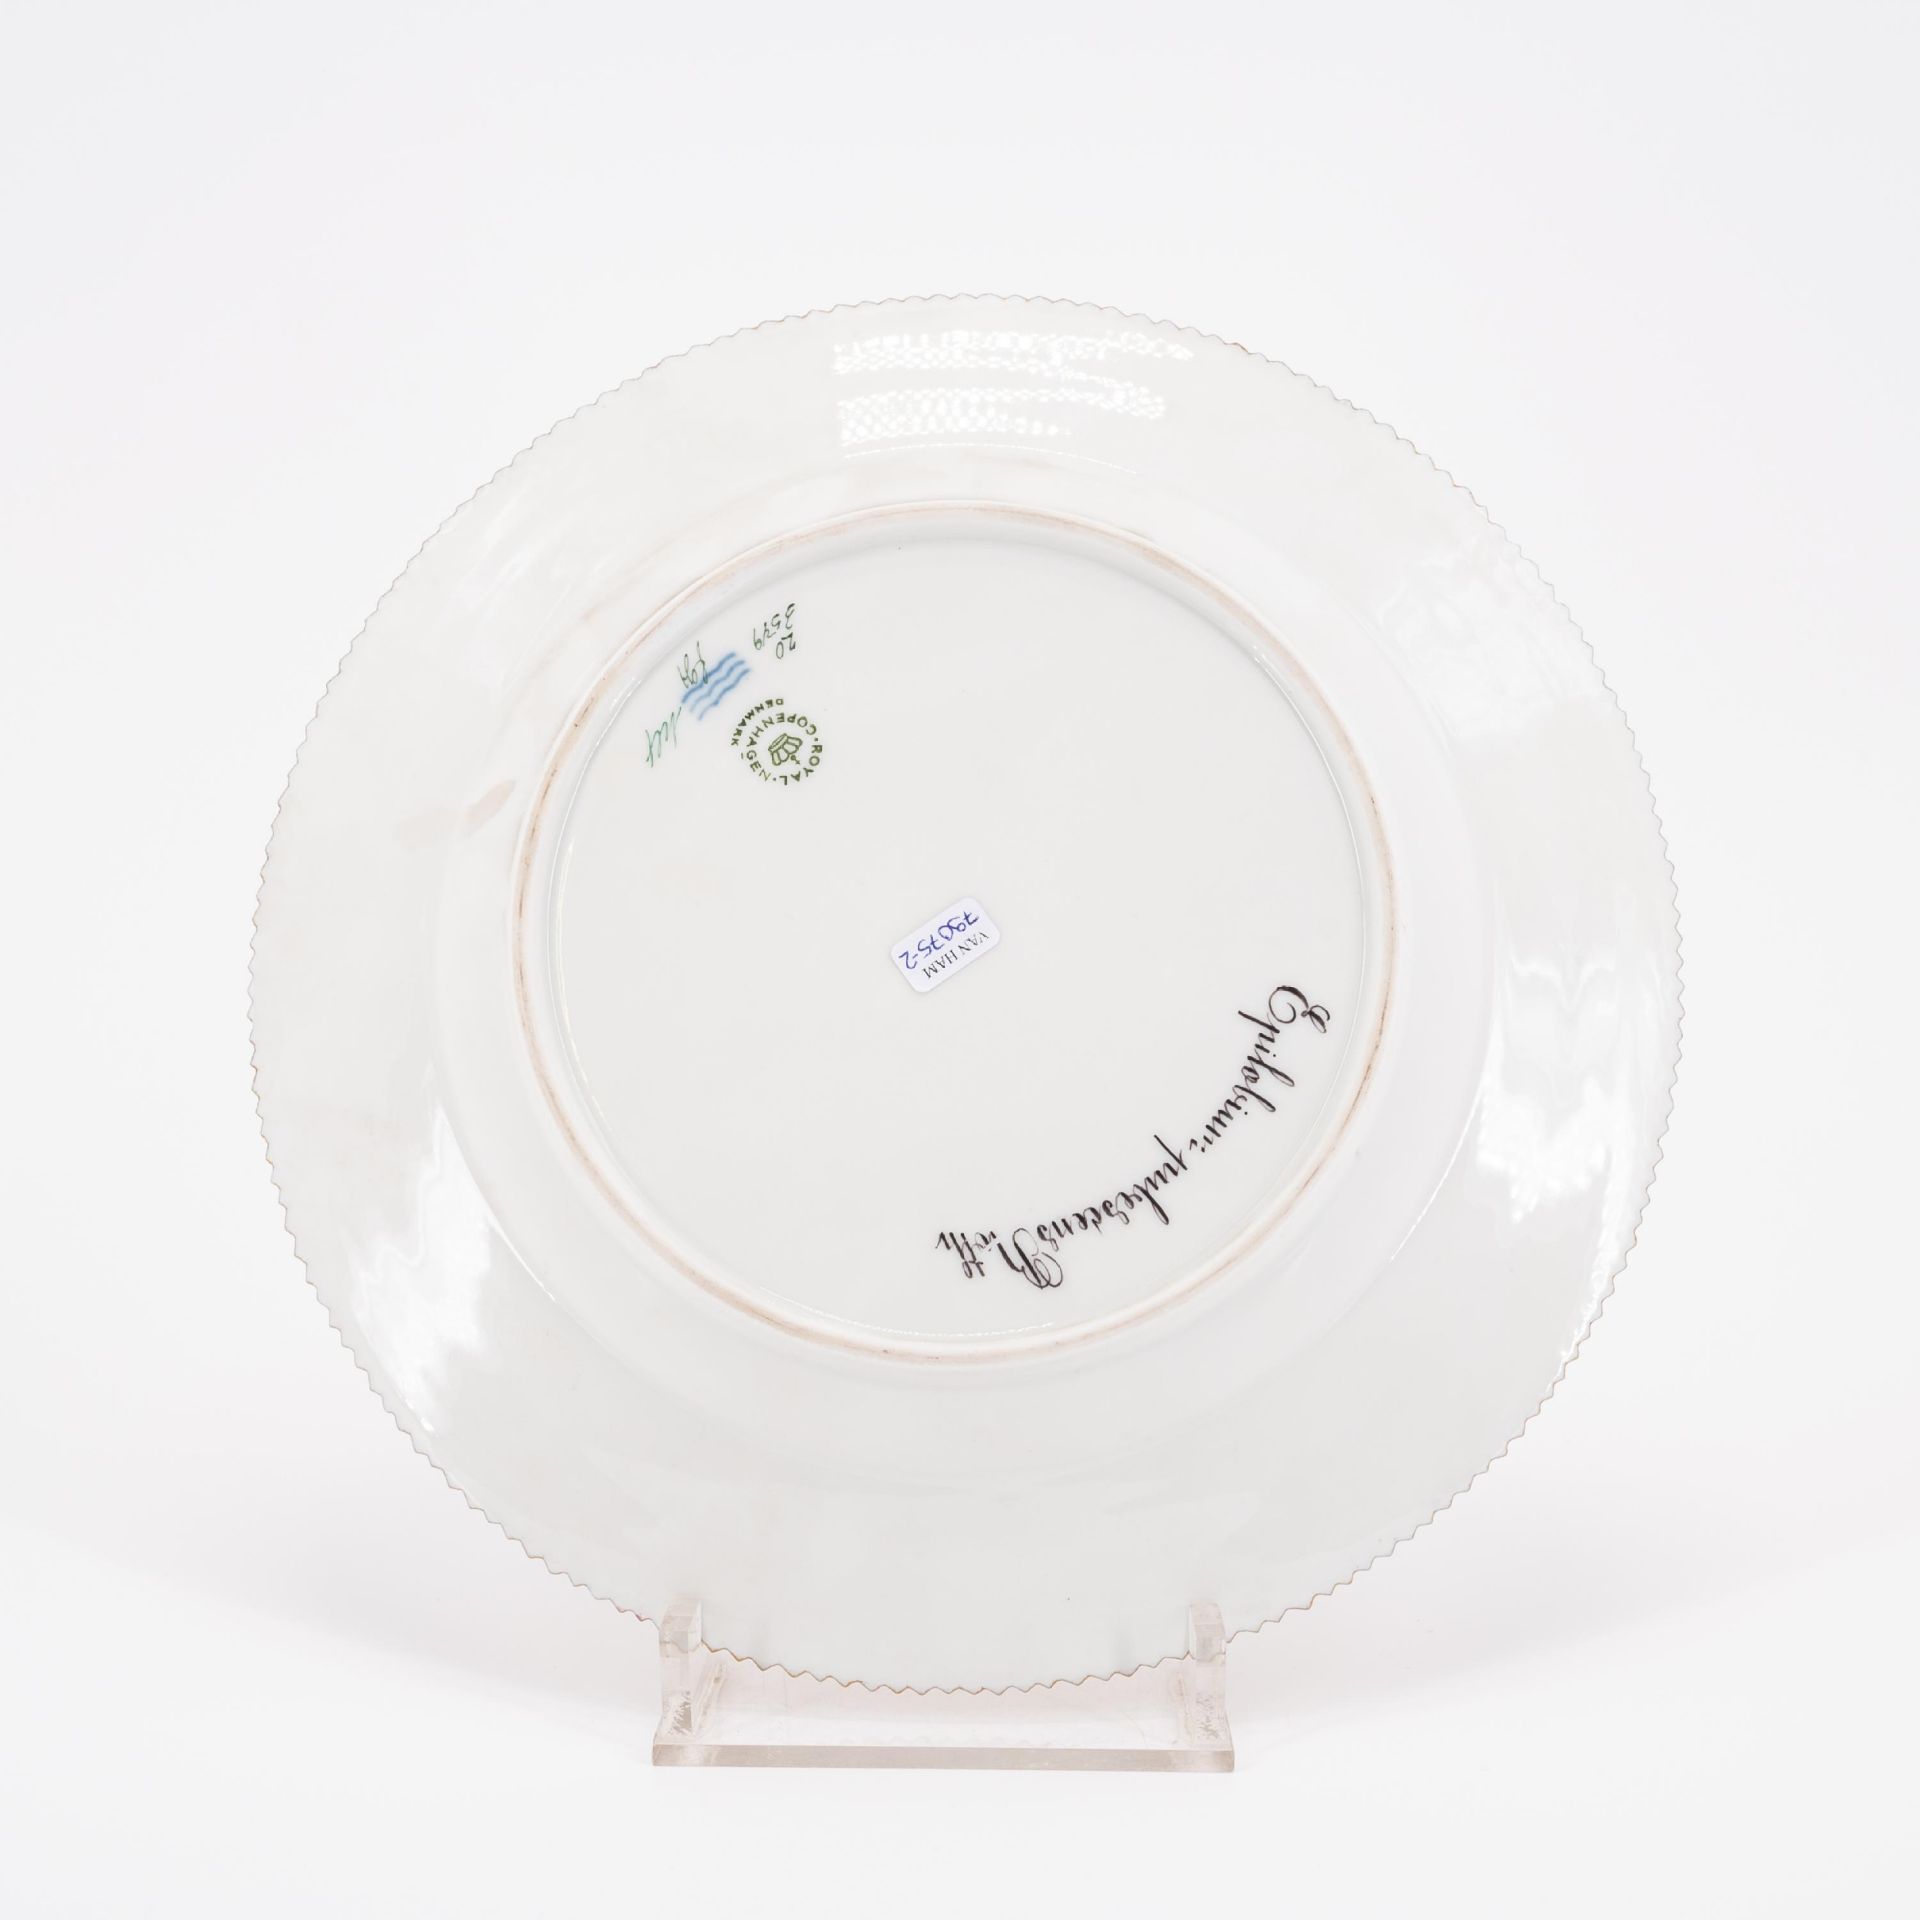 18 PIECES FROM A PORCELAIN DINNER SERVICE 'FLORA DANICA' - Image 6 of 26